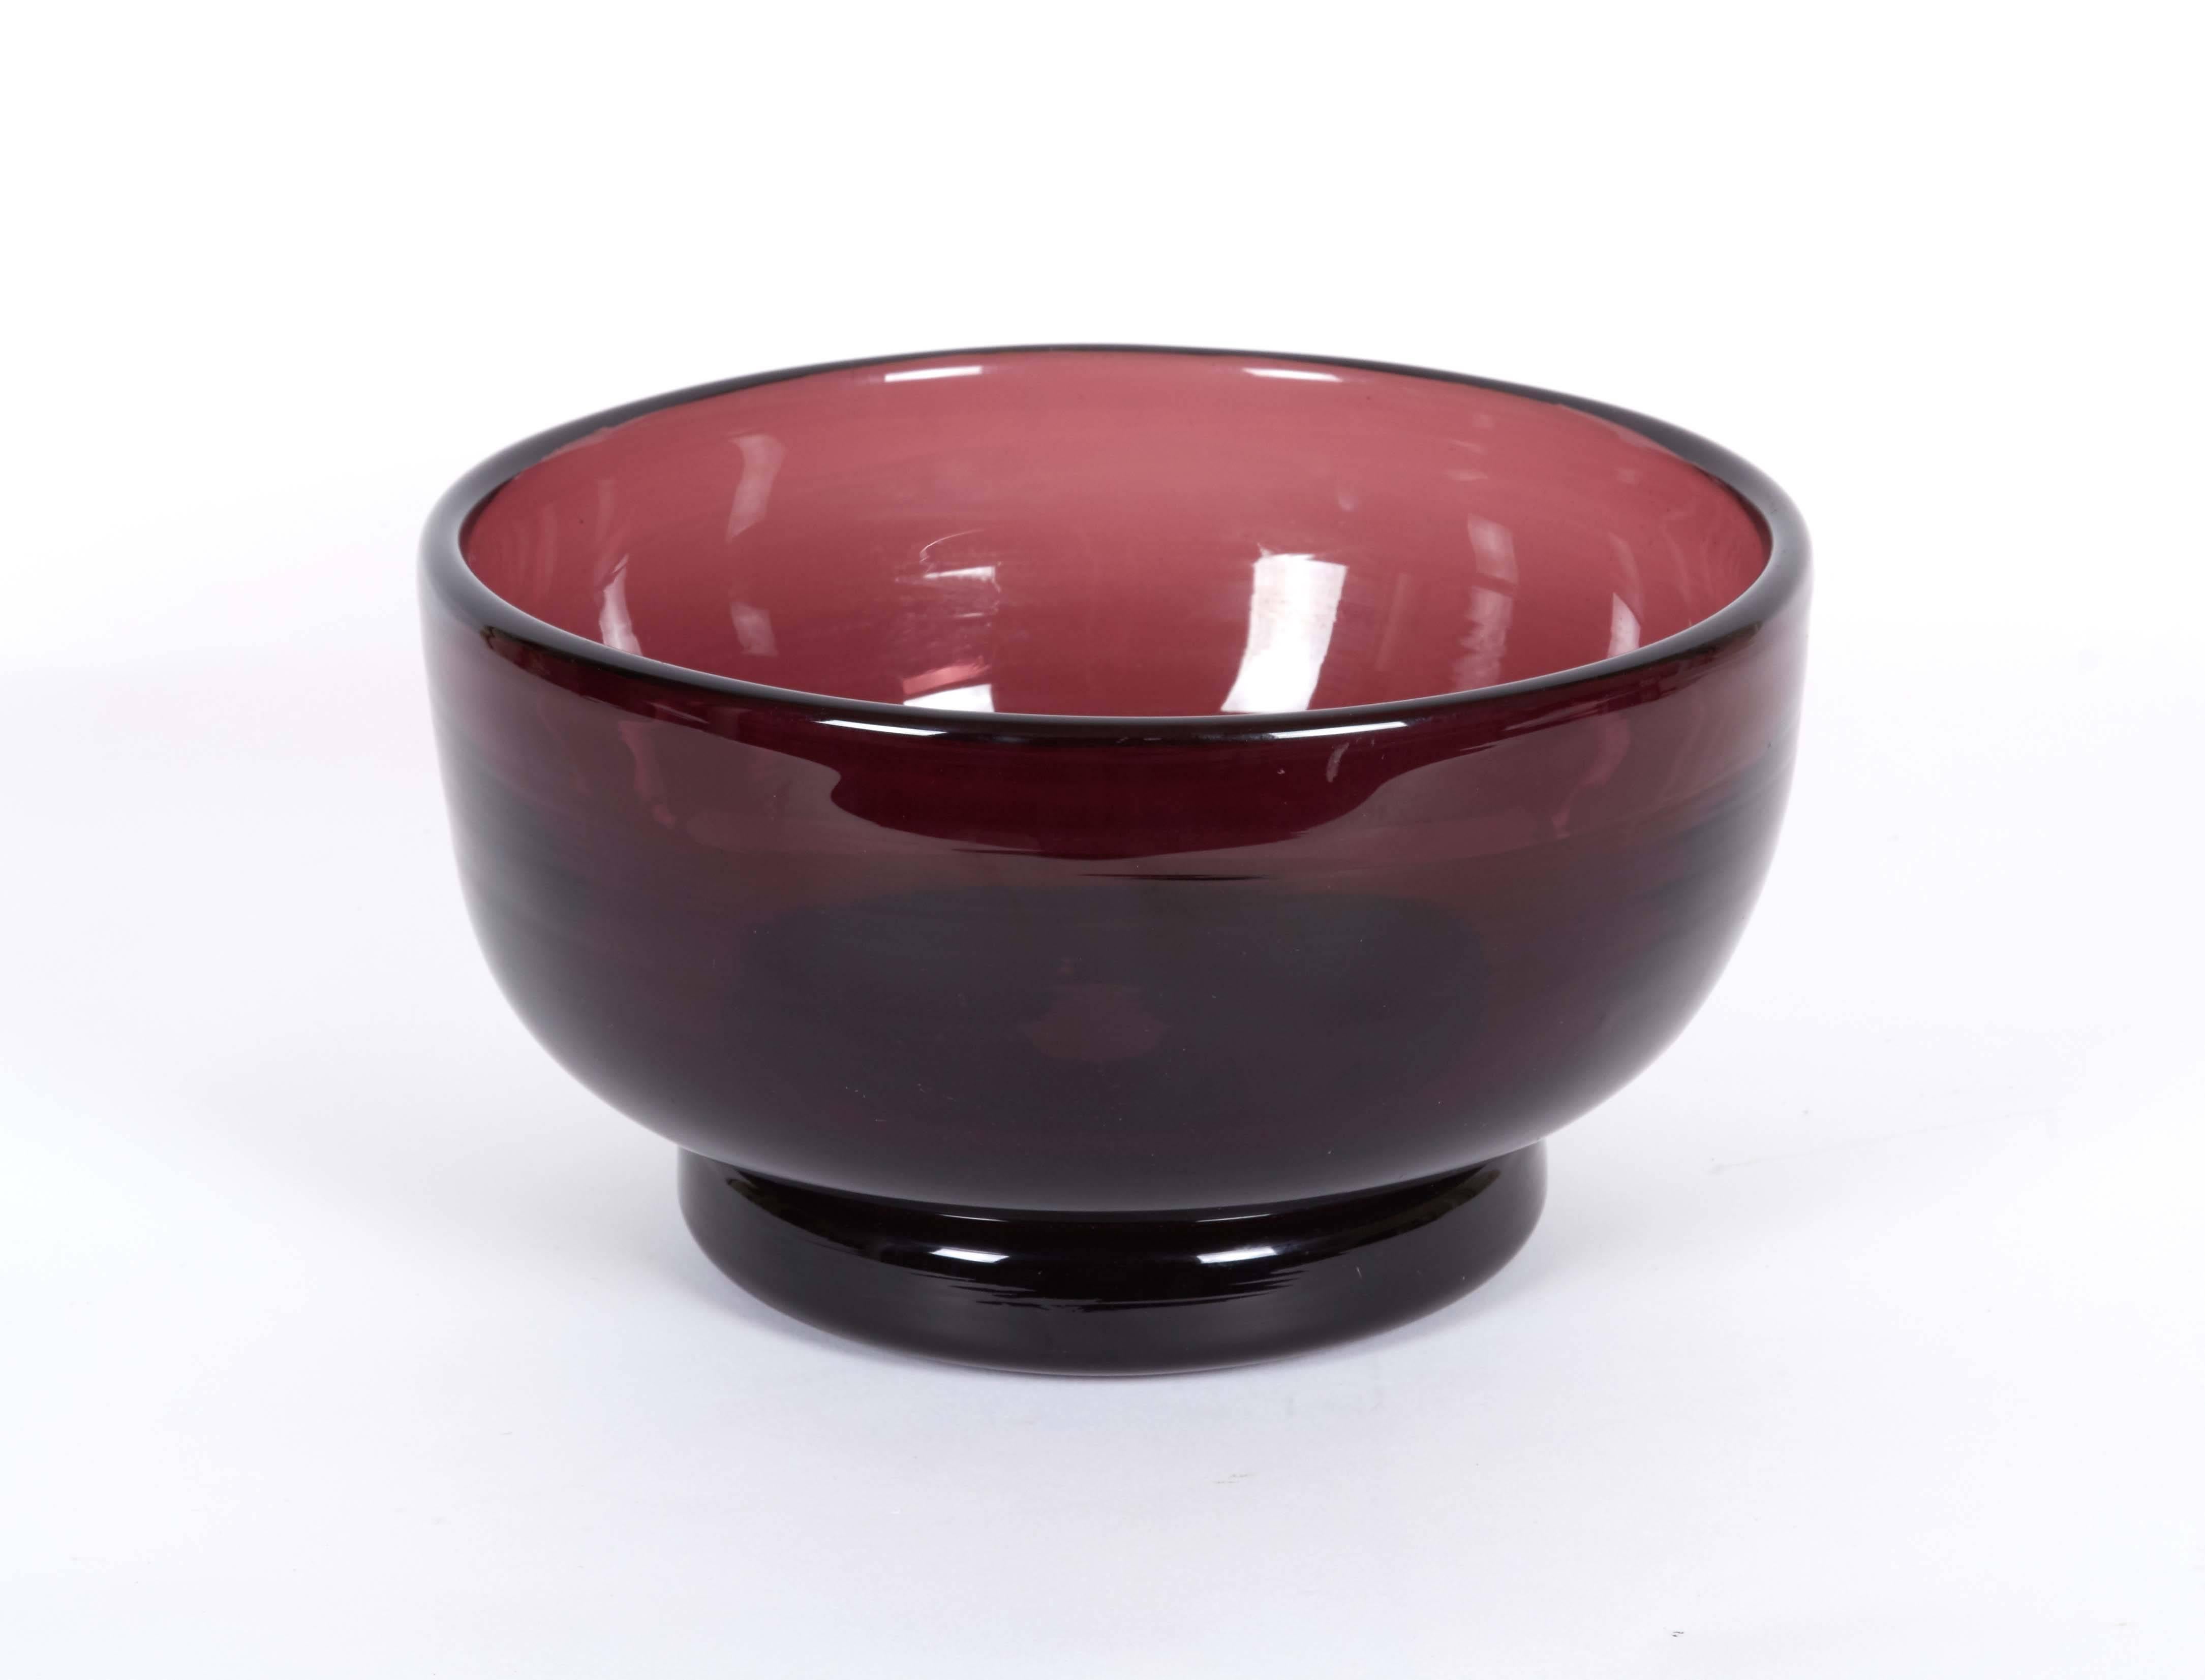 A footed bowl, entirely in heavy hand blown aubergine glass, circa 1960s. Very good vintage condition, minor presence of naturally occurring bubbles, wear to base consistent with age and use.